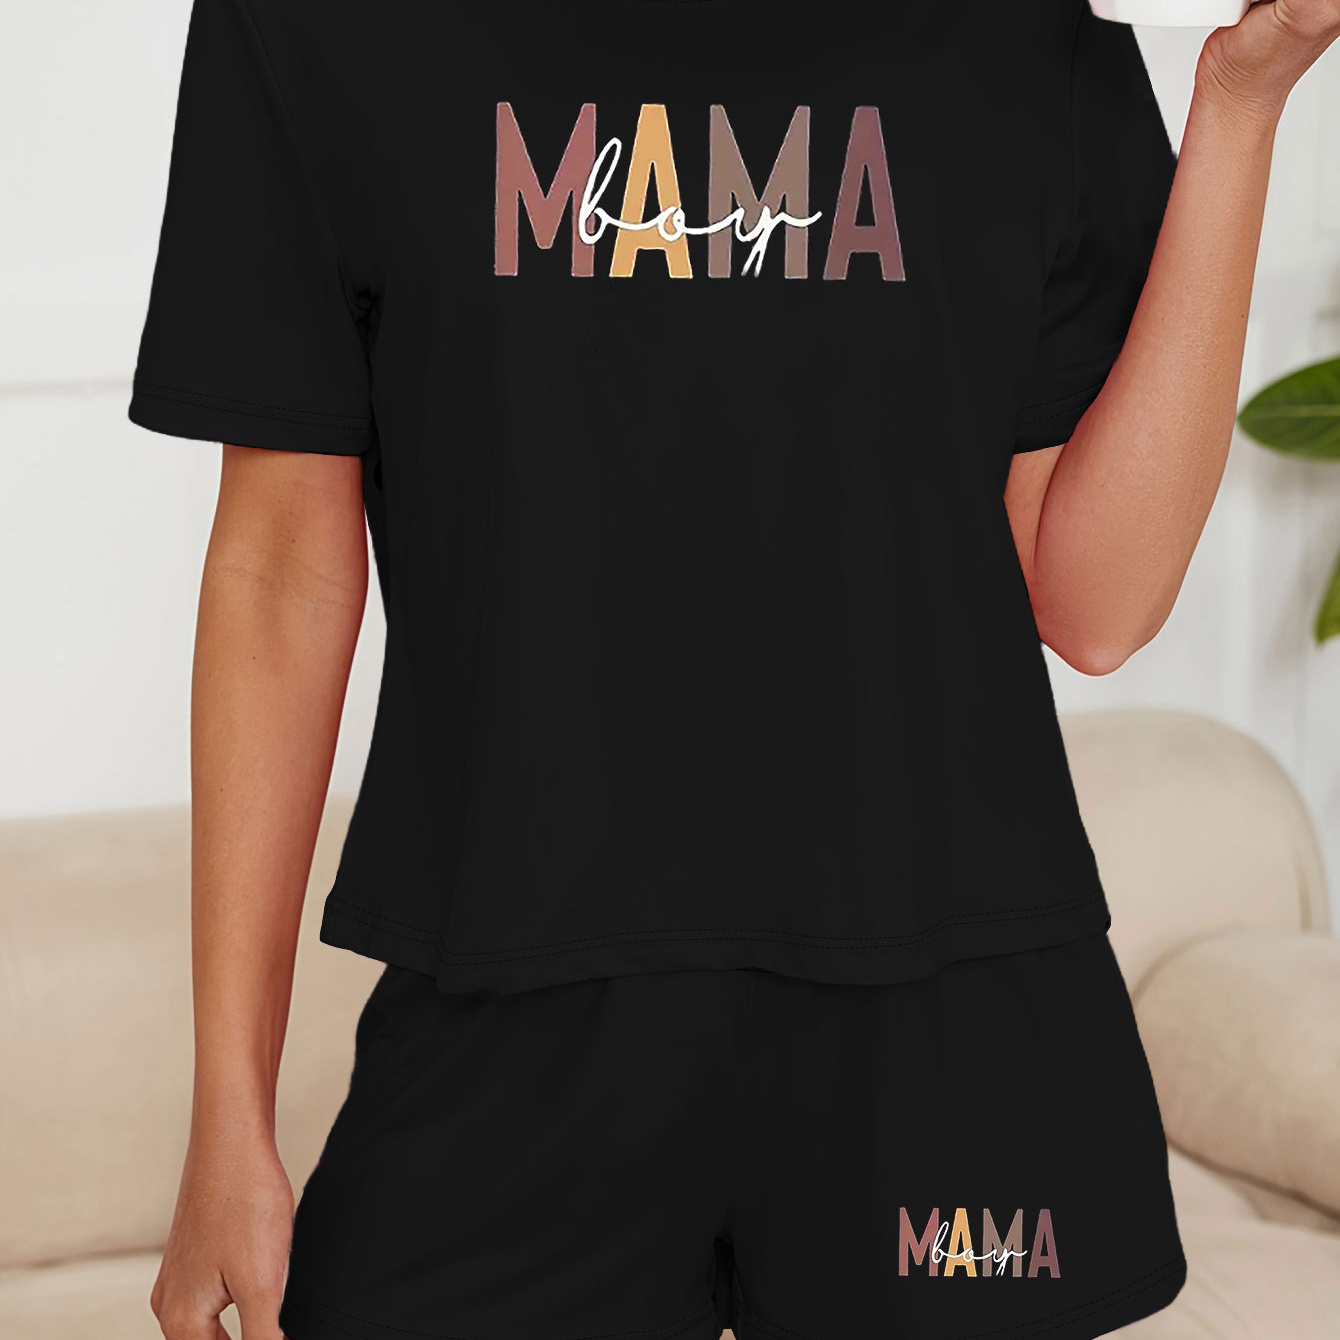 

Women's "mama" Printed Casual Round Neck Short Sleeve T-shirt & Shorts Loungewear Set For Mother's Day, Relax Fit Style